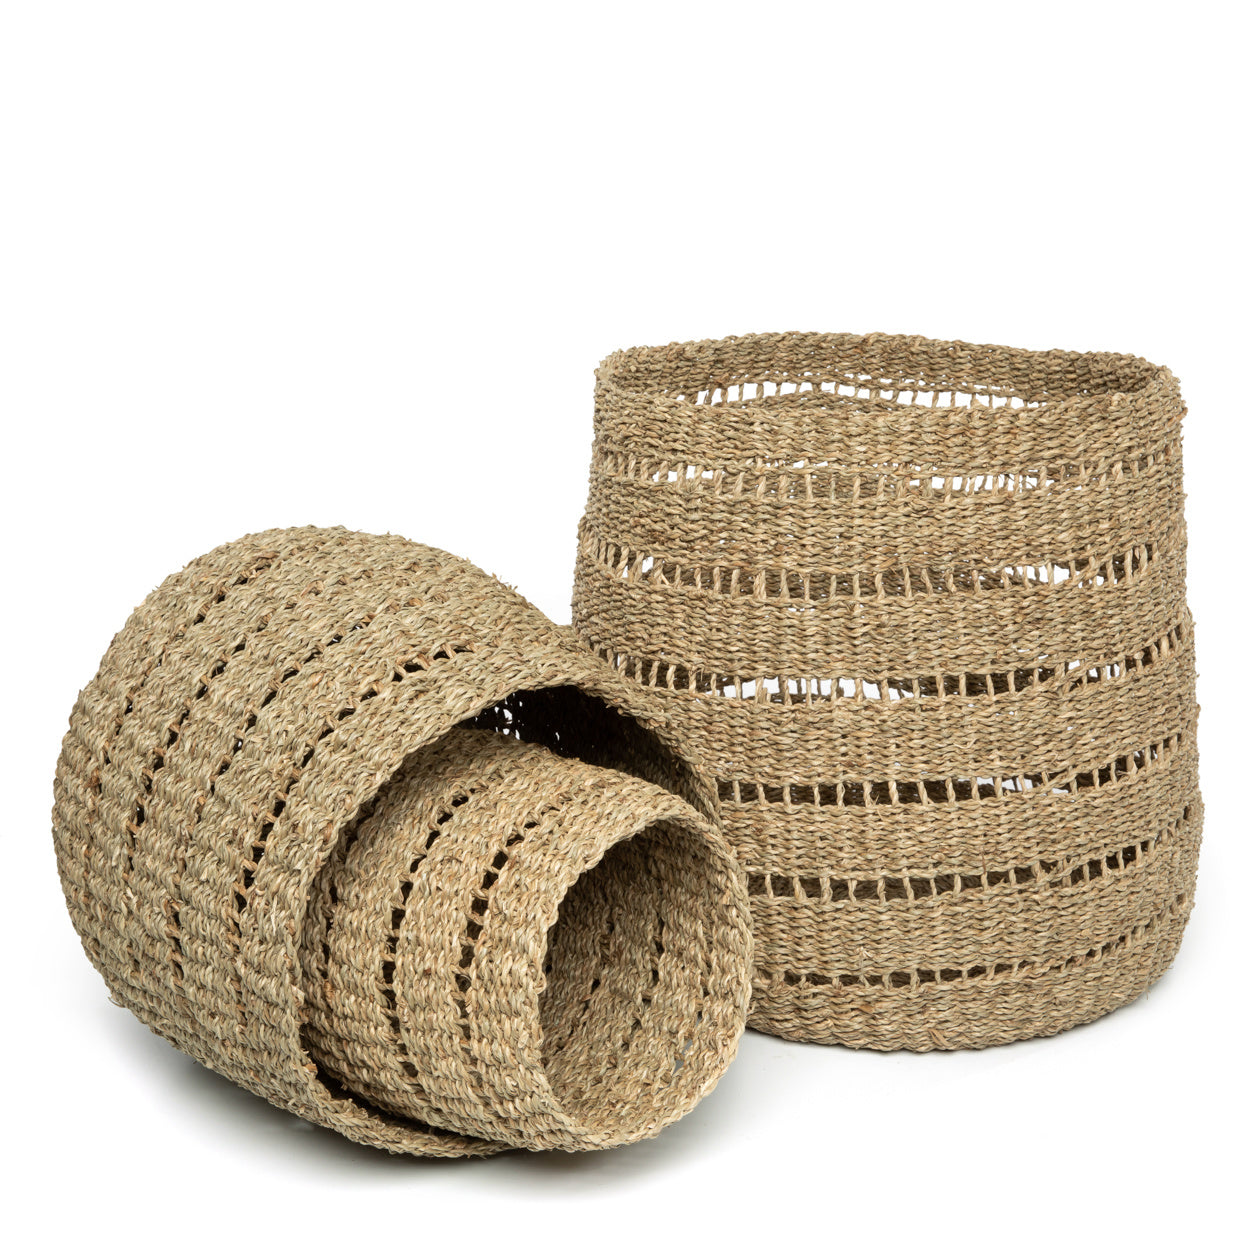 THE NINH BINH Baskets Set of 3 half-folded front view